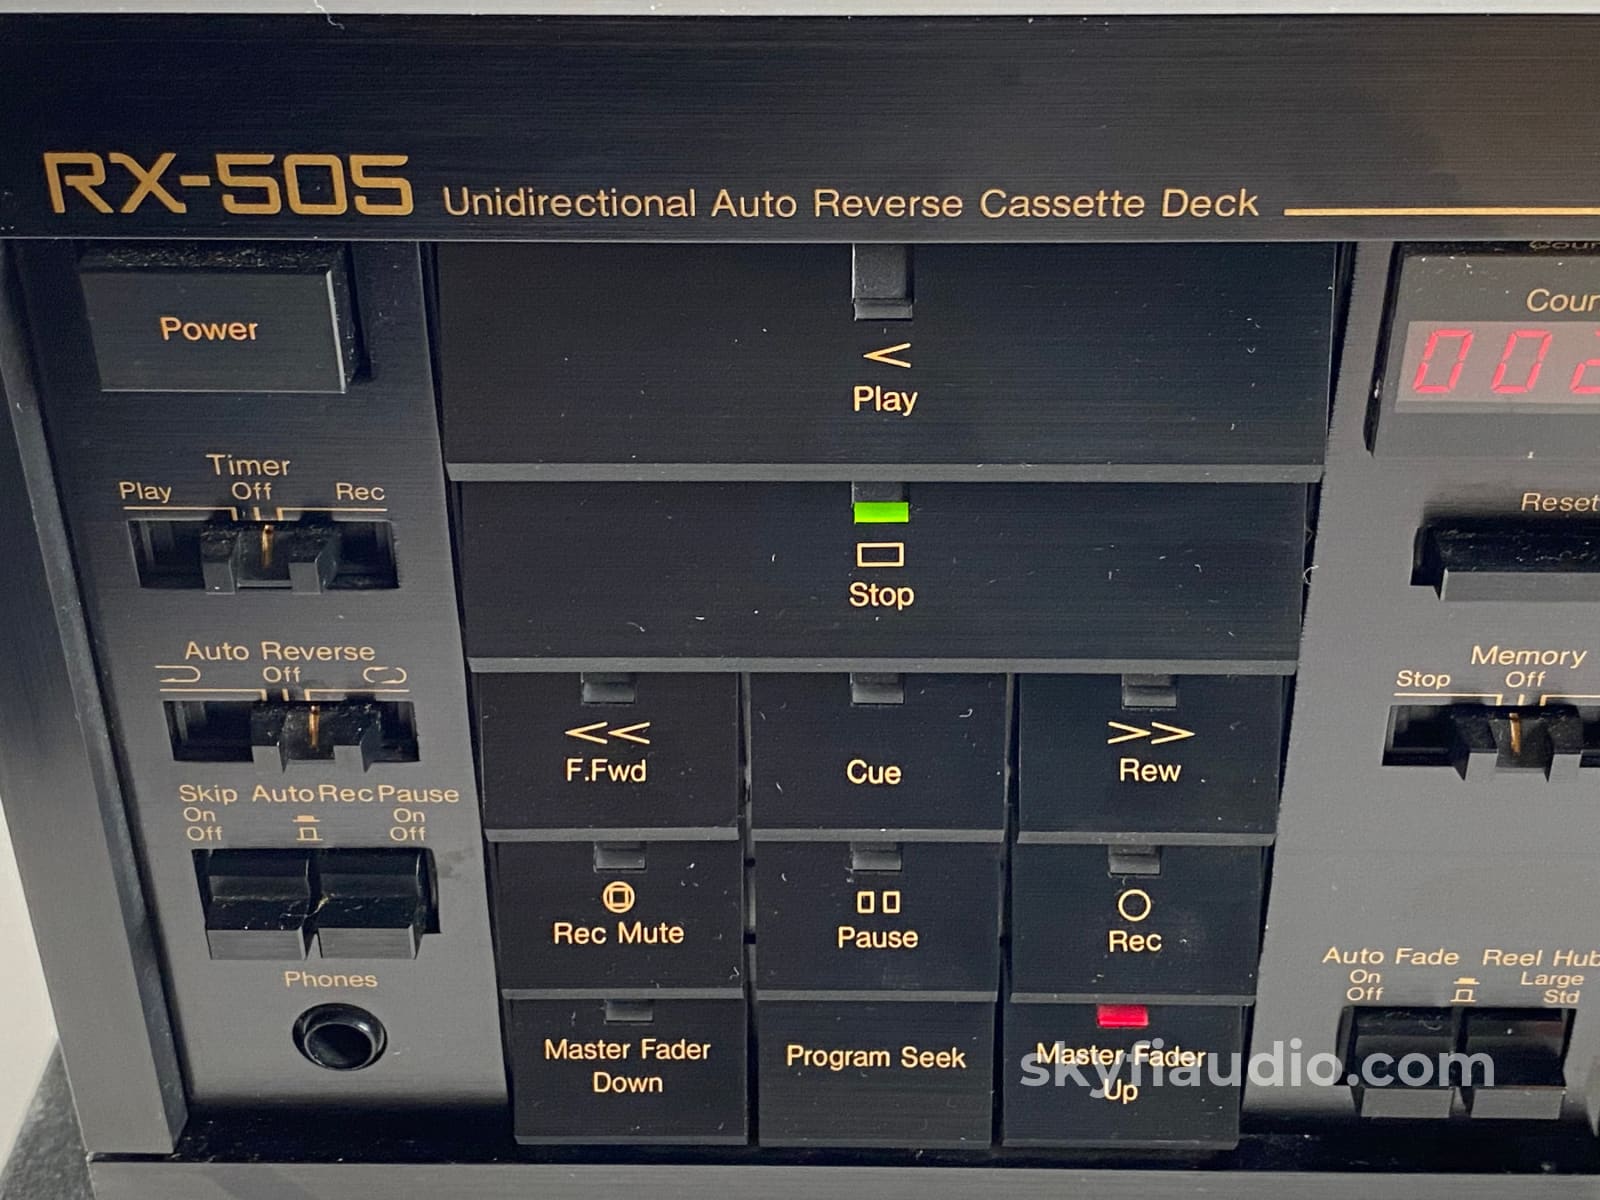 Nakamichi Rx-505 Tape Deck 3 Heads And Featuring Unique Physical Auto Reverse